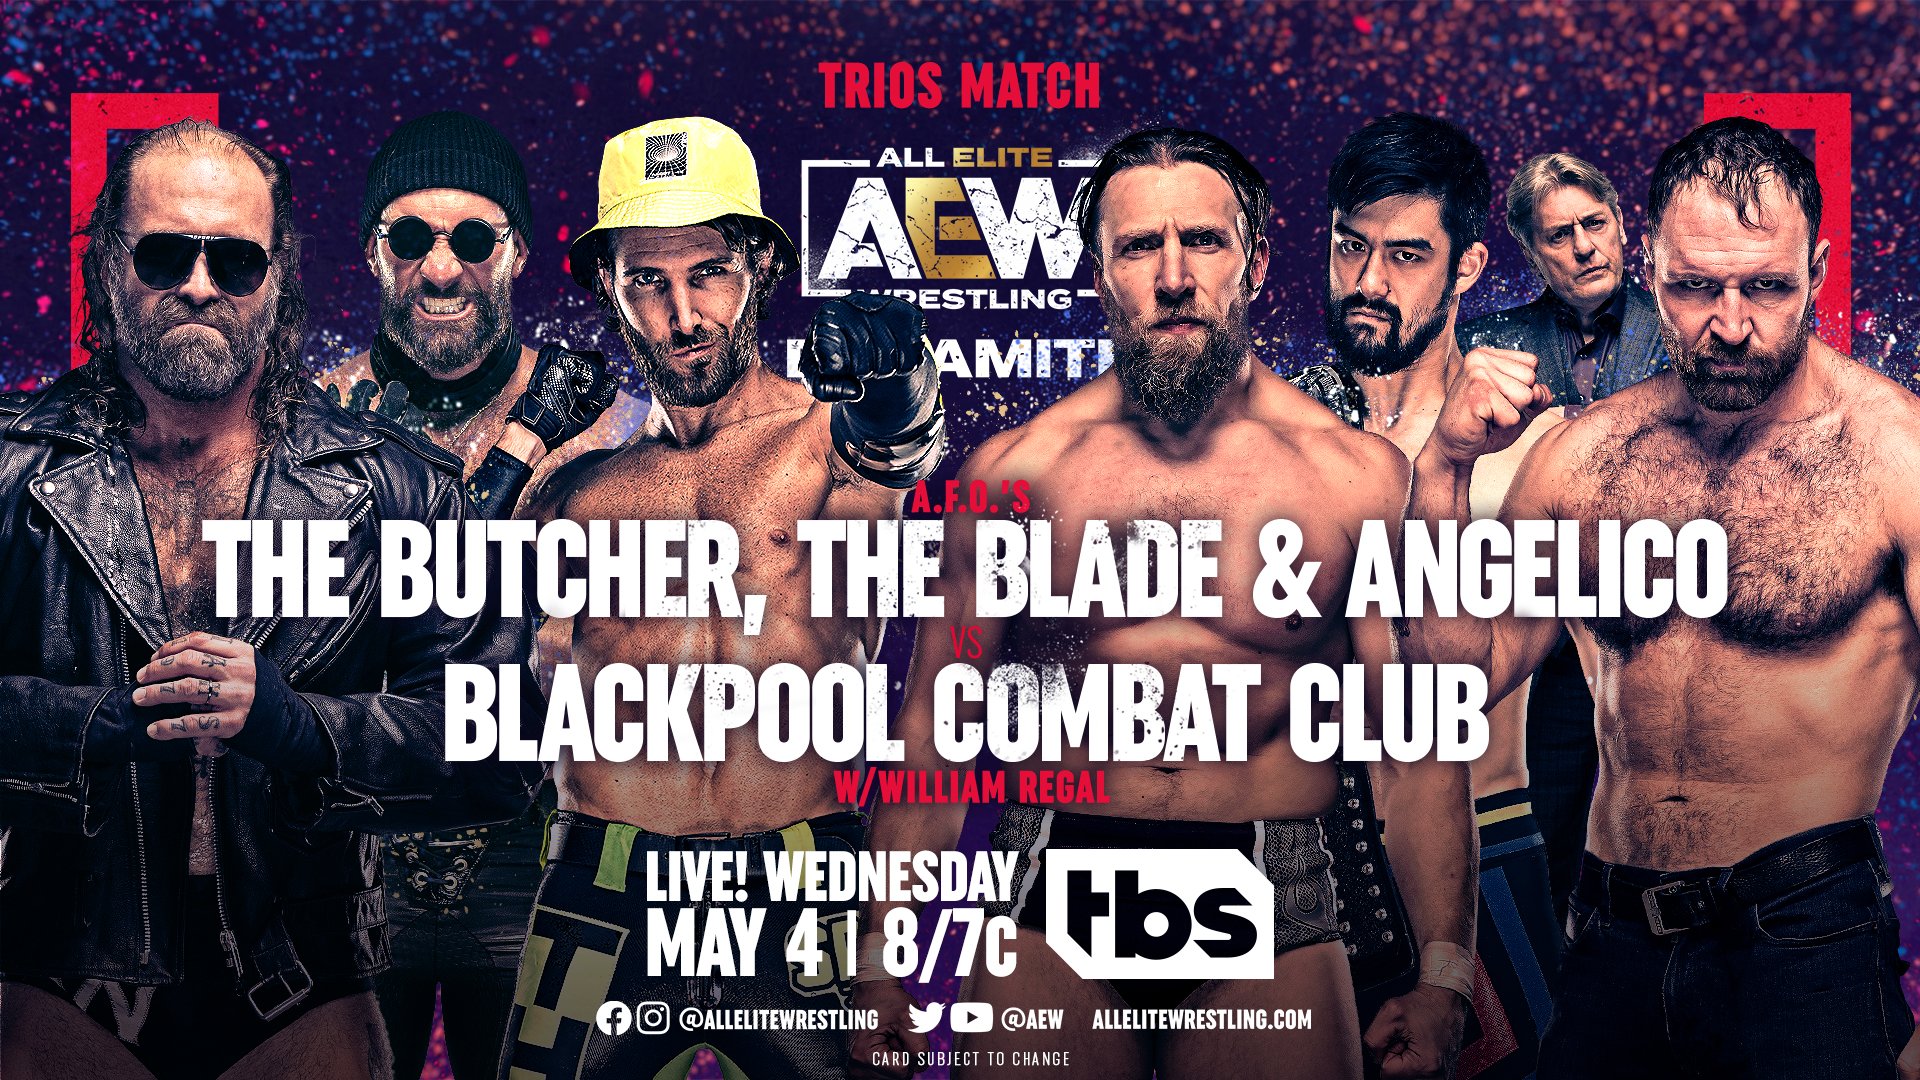 All Elite Wrestling on Twitter: "No rest for the #BlackpoolCombatClub as they continue their campaign of violence! This week they have their sights set on #AFO's Butcher @andycomplains, @BladeofBuffalo & @AngelicoAAA. Tune